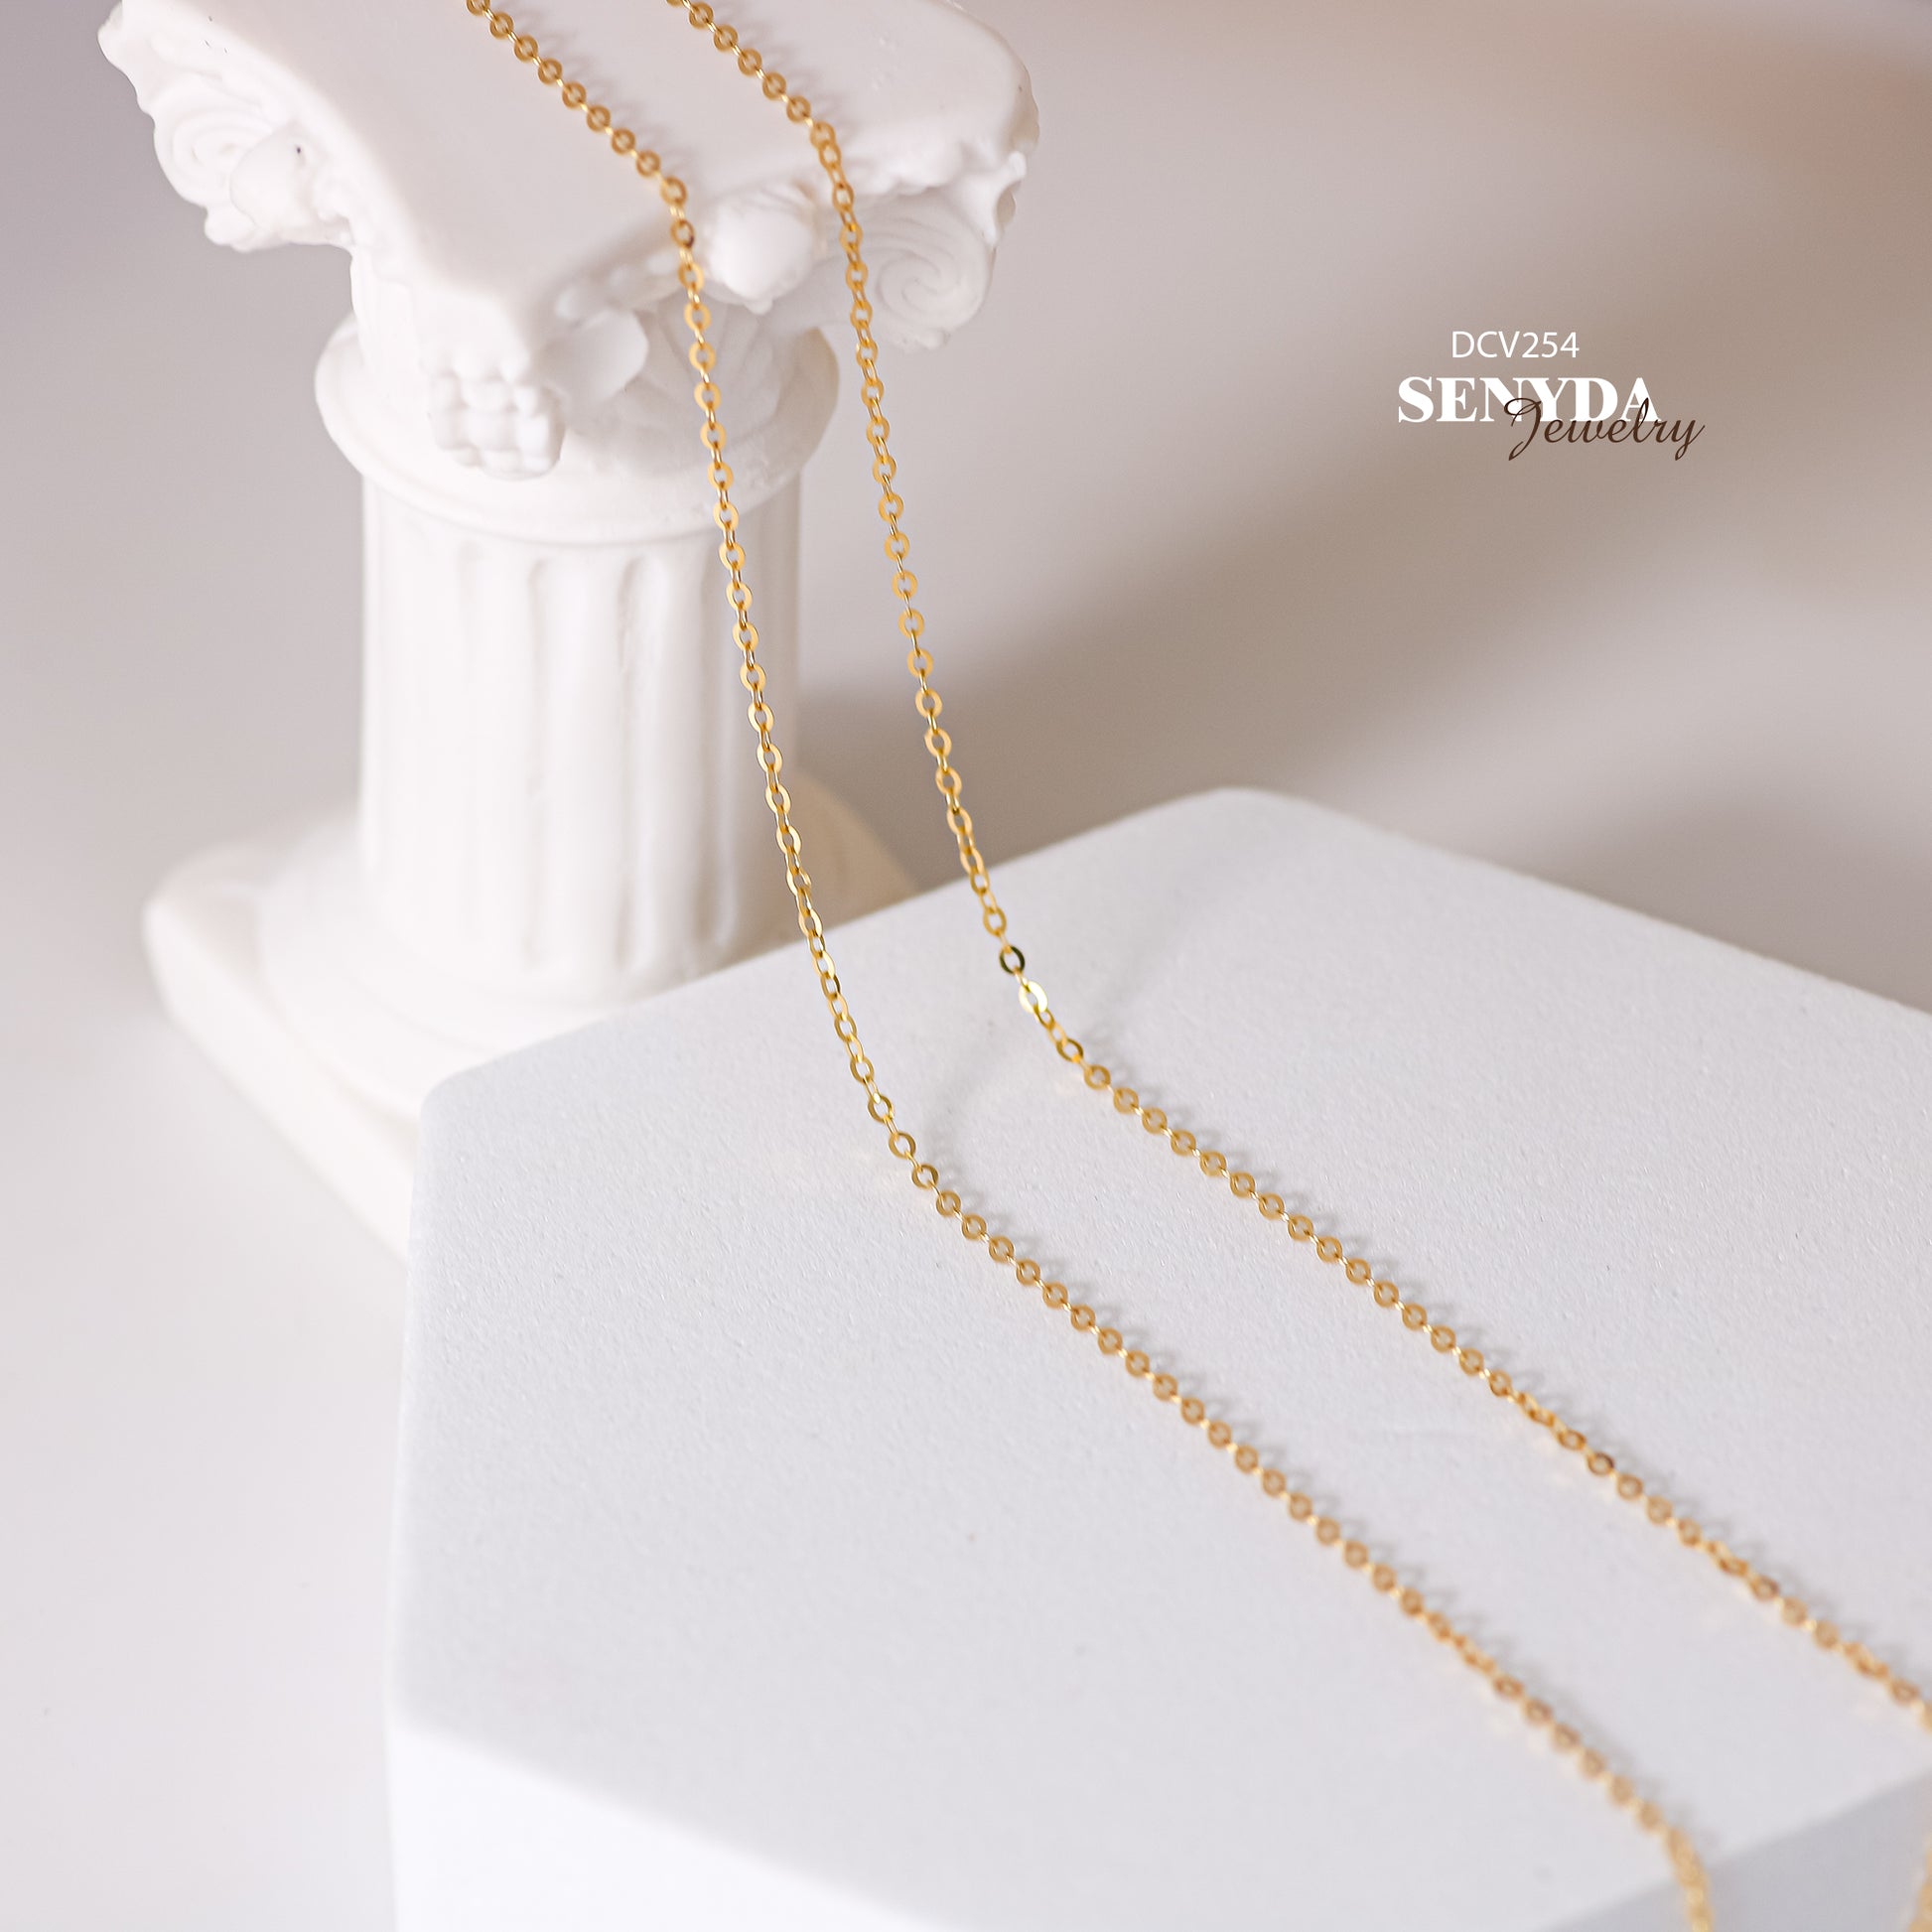 Senyda 18K Solid Gold Dainty Chain Necklace